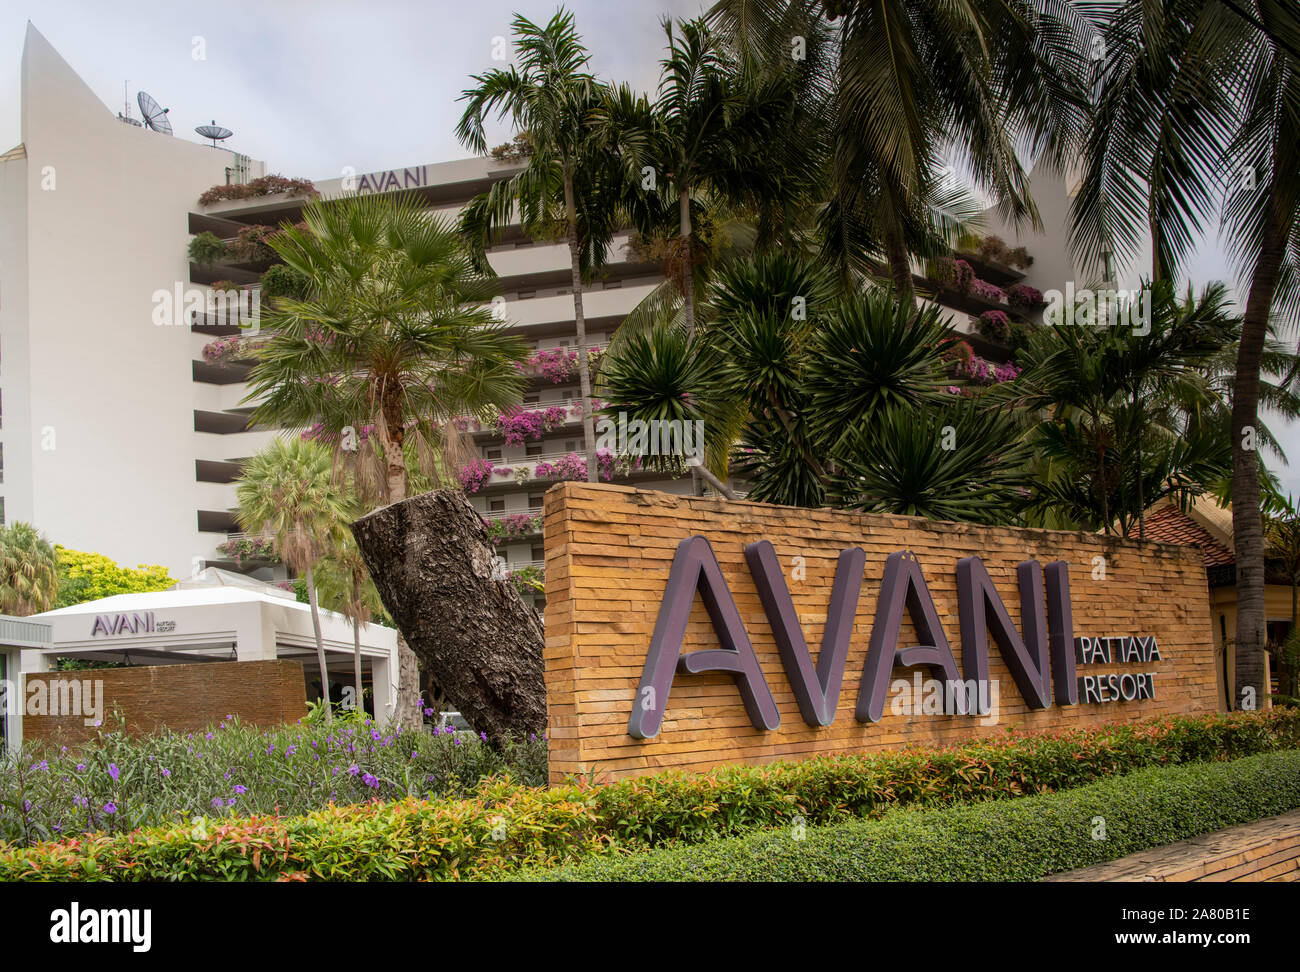 Pattaya, Thailand , September 8, 2019: View of the entrance to the Avani  Hotel Stock Photo - Alamy